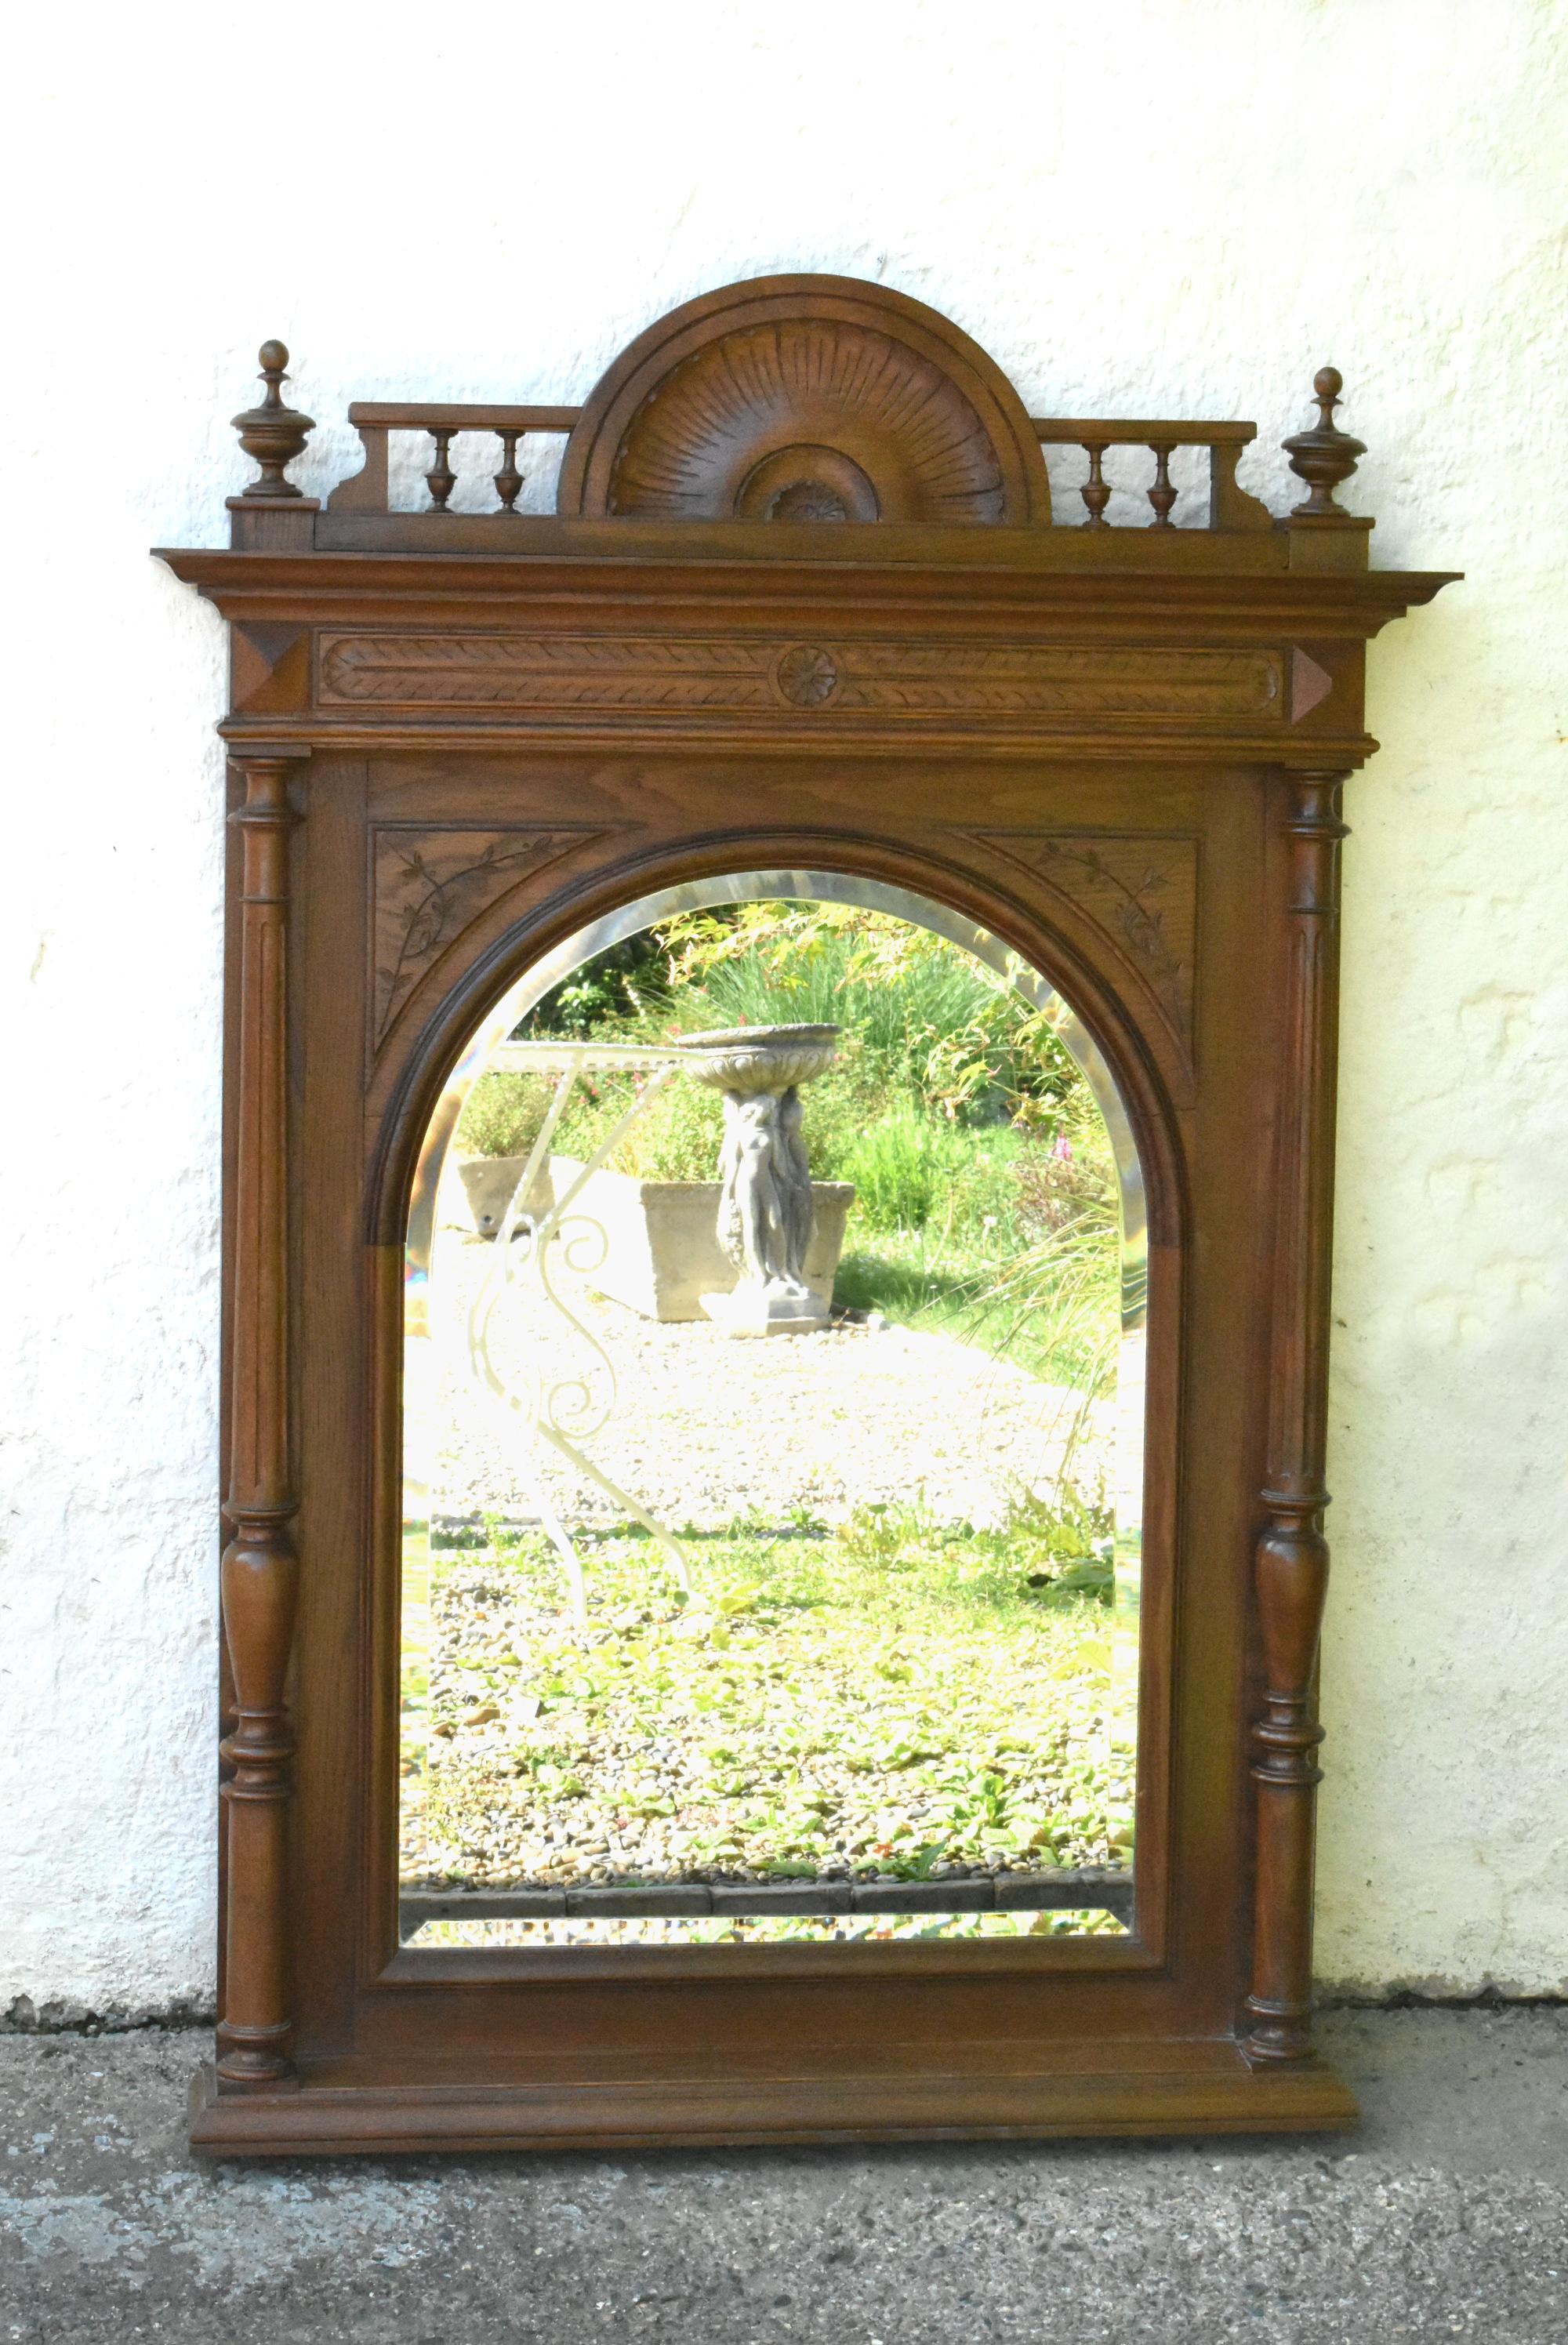 Large Oak Overmantel Mirror Henri II

This impressive overmantel mirror features an arched bevelled mirror plate set into a solid oak frame.

The original mirror is flanked on both side by turned tapered columns.

To the top is a demilune crest set